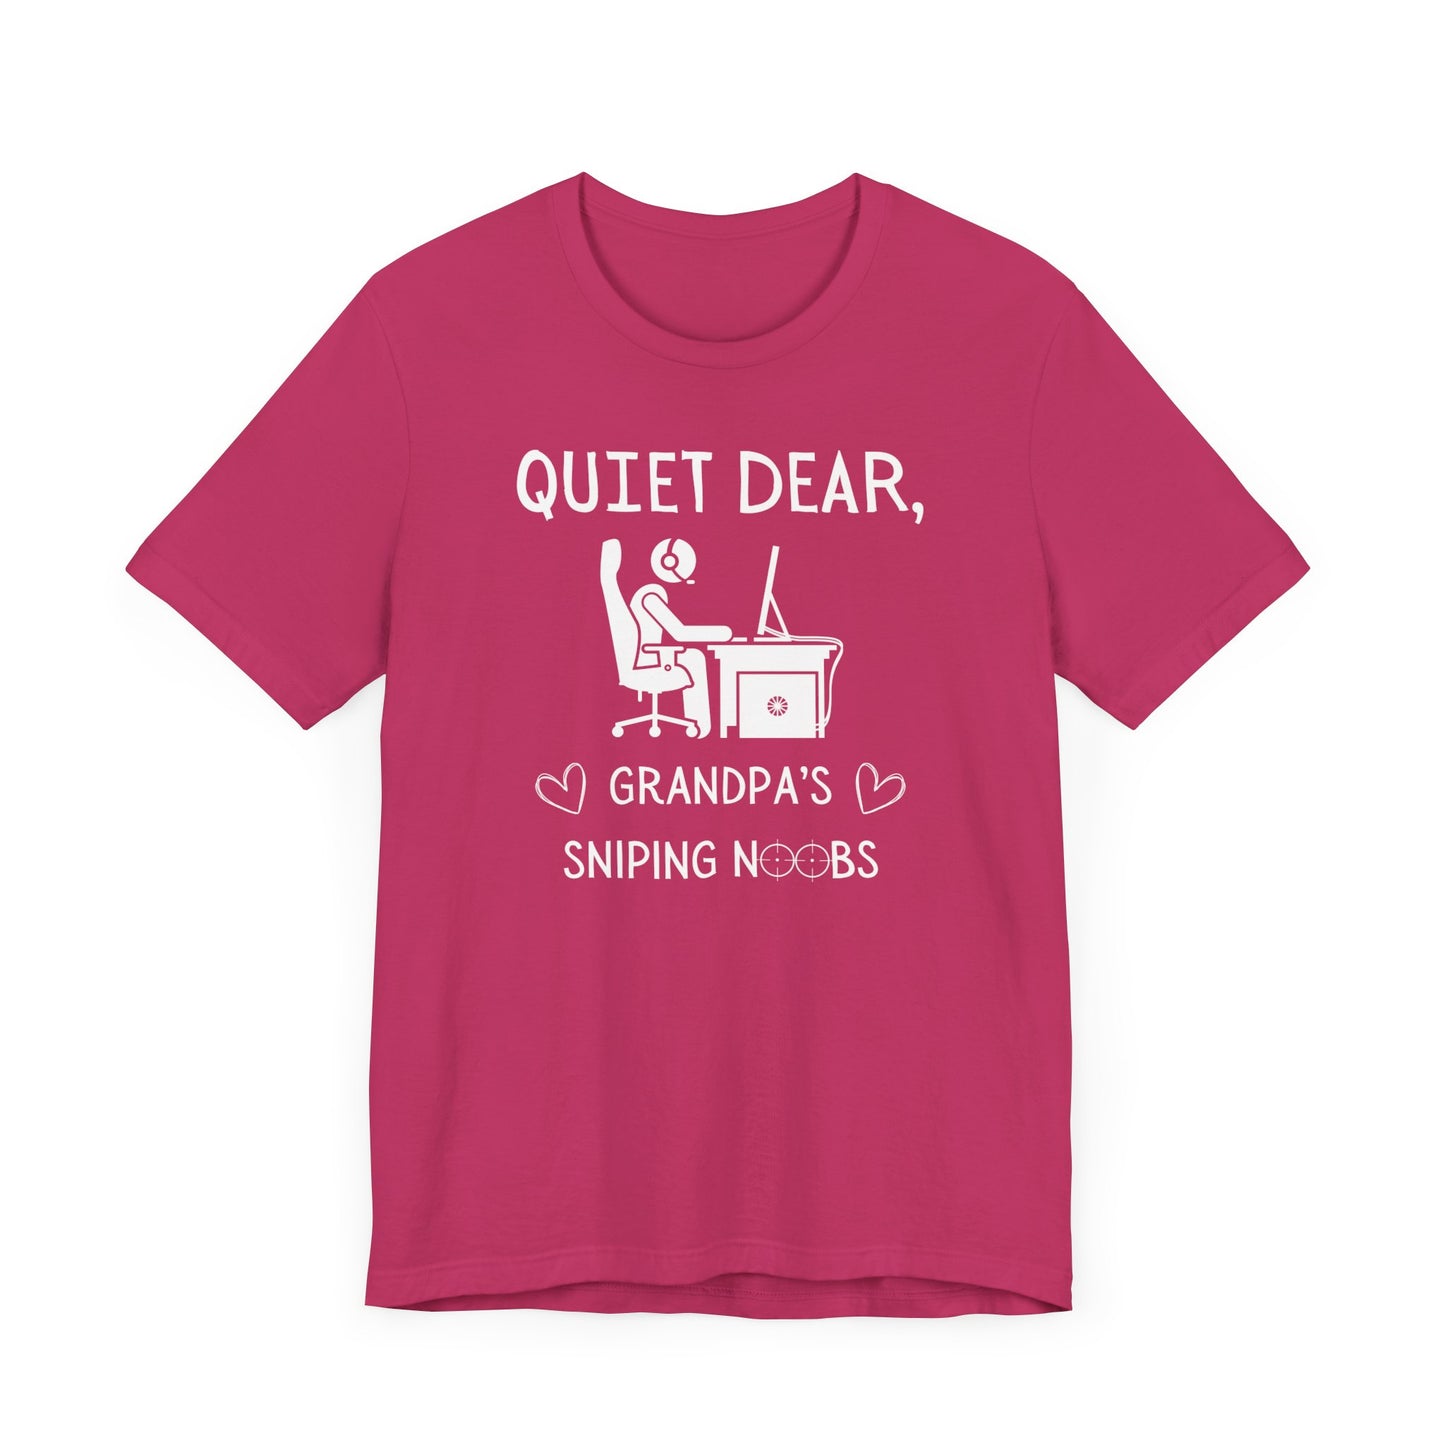 A flat image of a berry pink t-shirt that reads Quiet Dear, Grandpa's Sniping Noobs in white text. The lower text is framed by two hearts, and the O's are in the shape of sniper scopes. In the center of the shirt is an image of a person at a desk with a gaming PC.